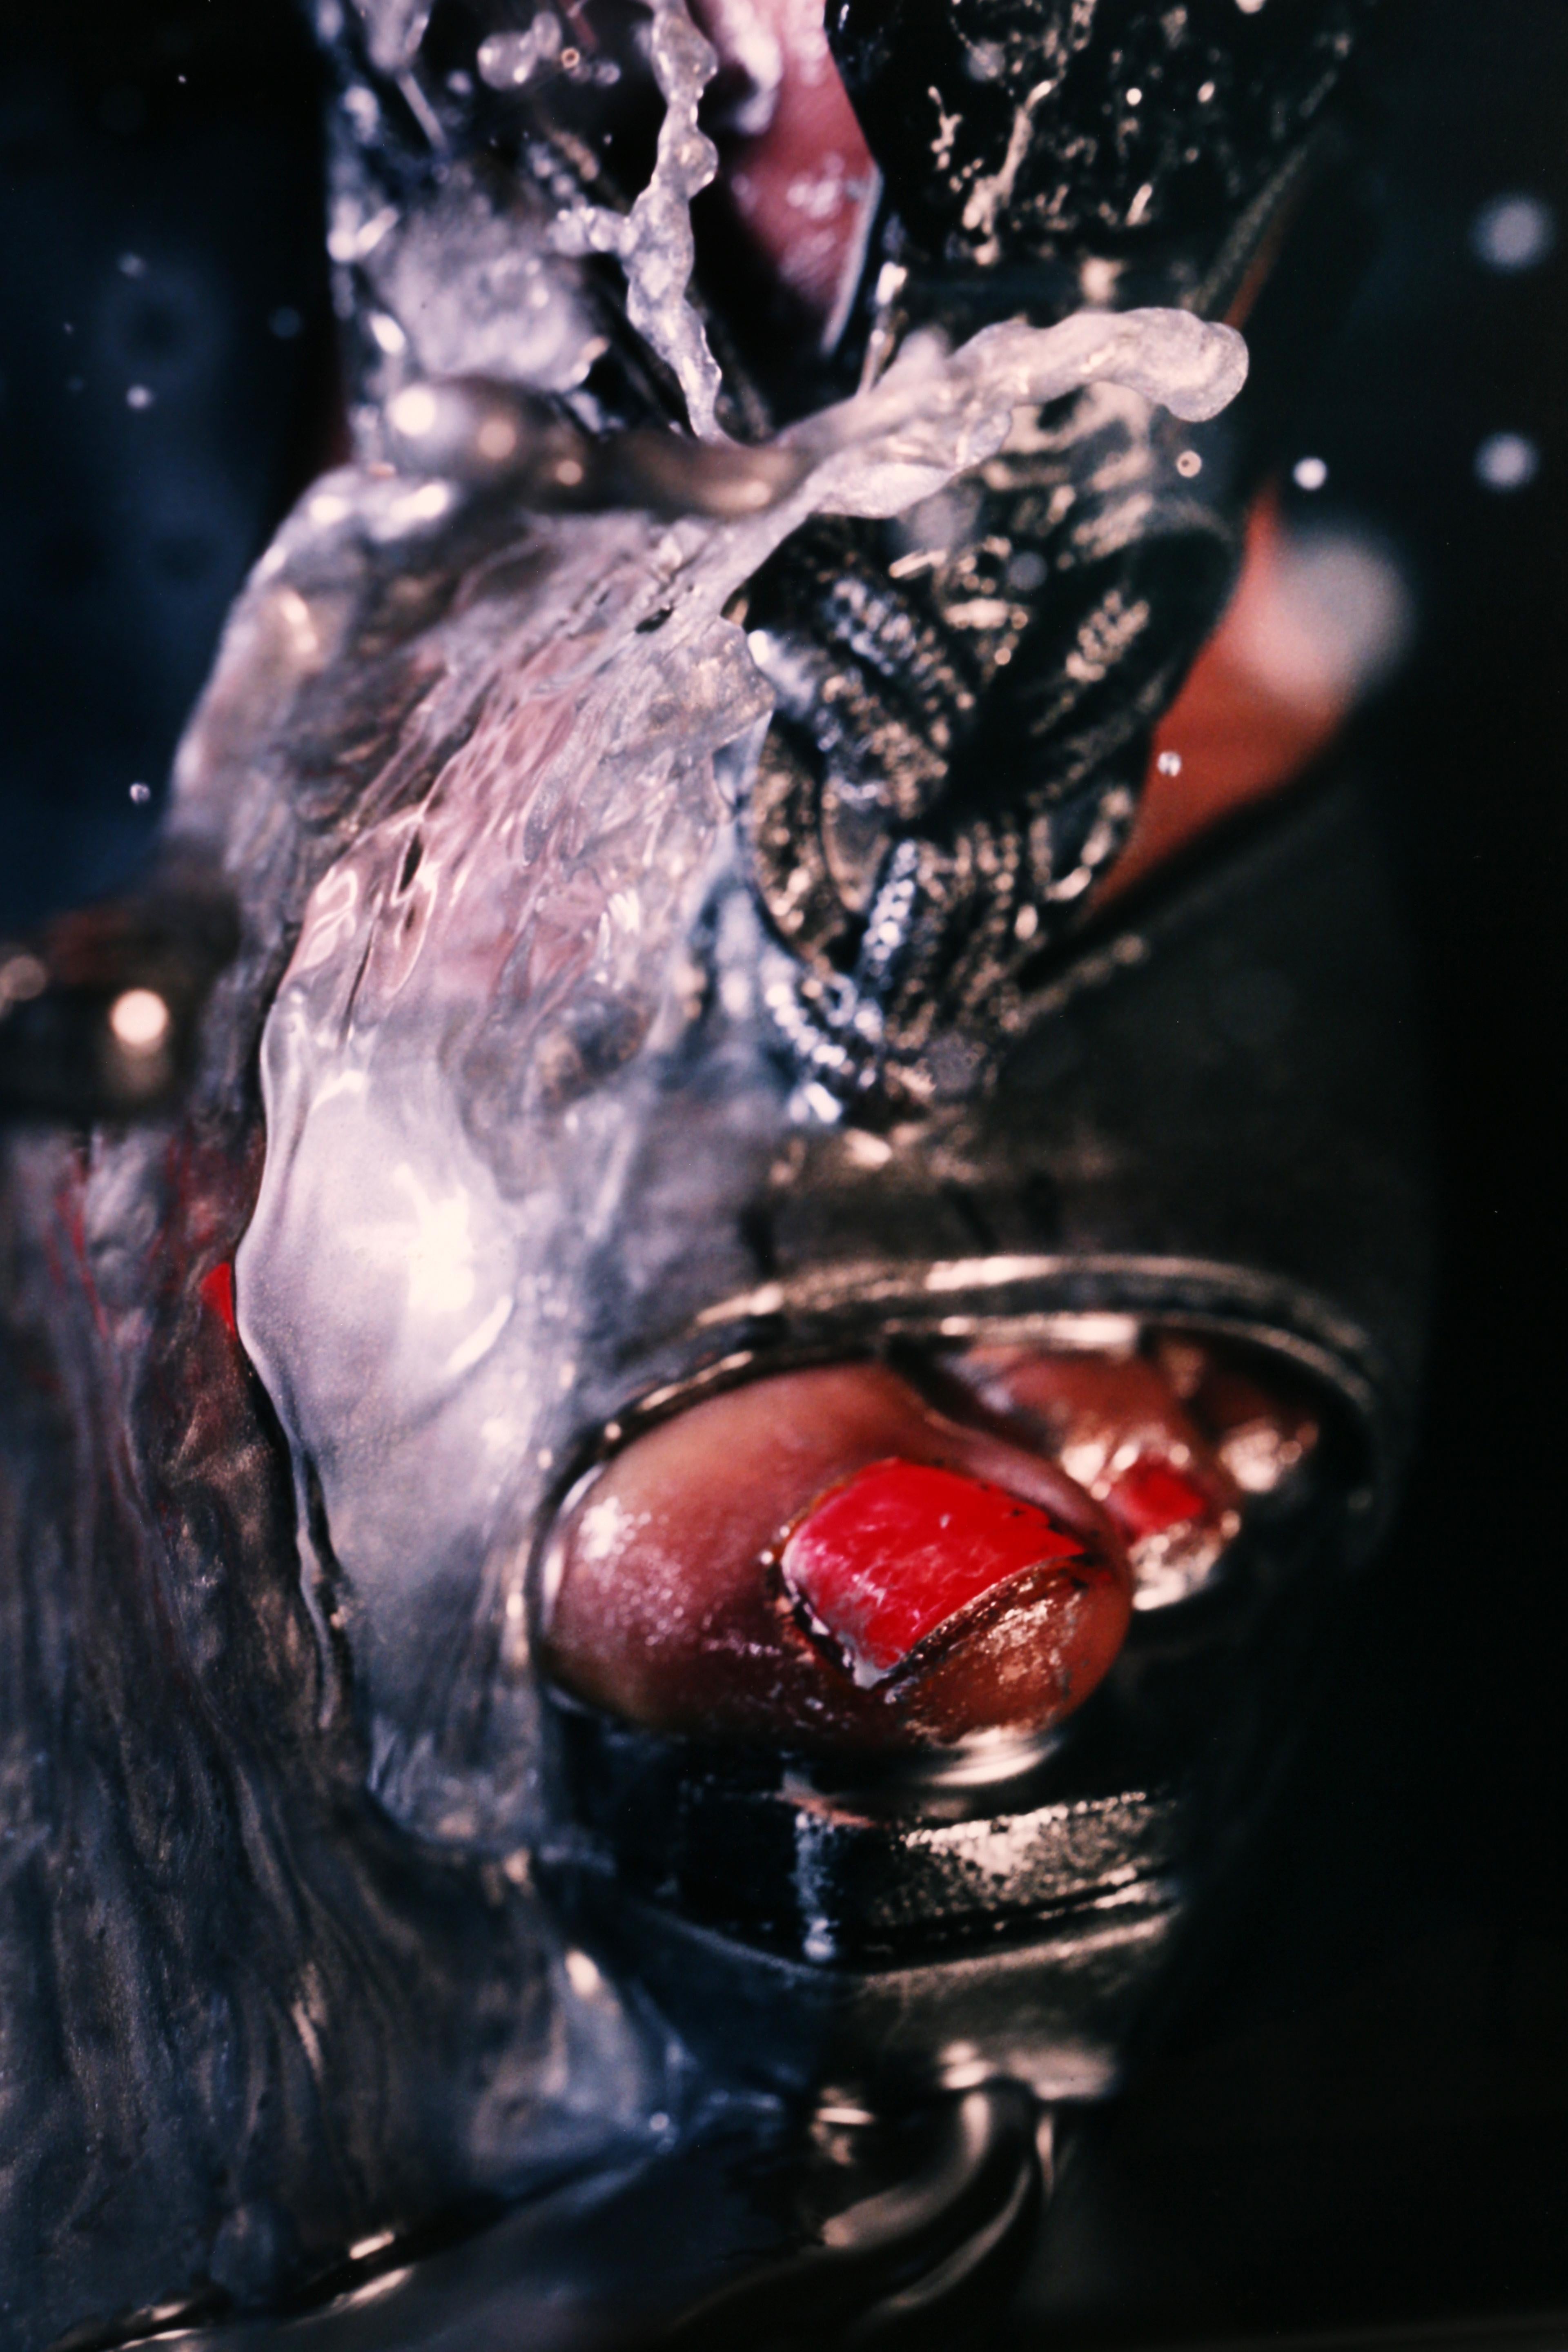 Swell  - Photograph by Marilyn Minter 